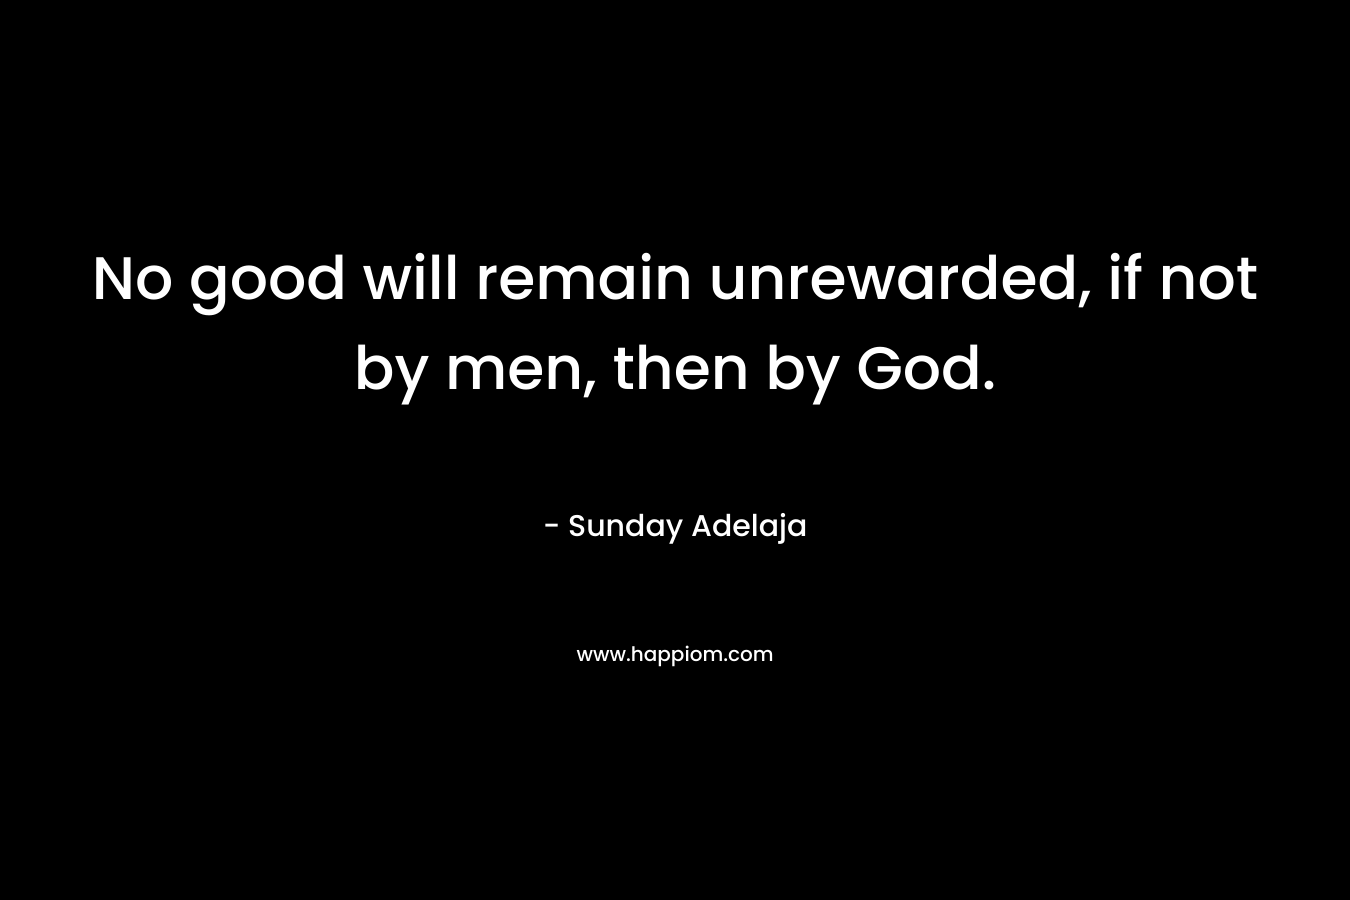 No good will remain unrewarded, if not by men, then by God.